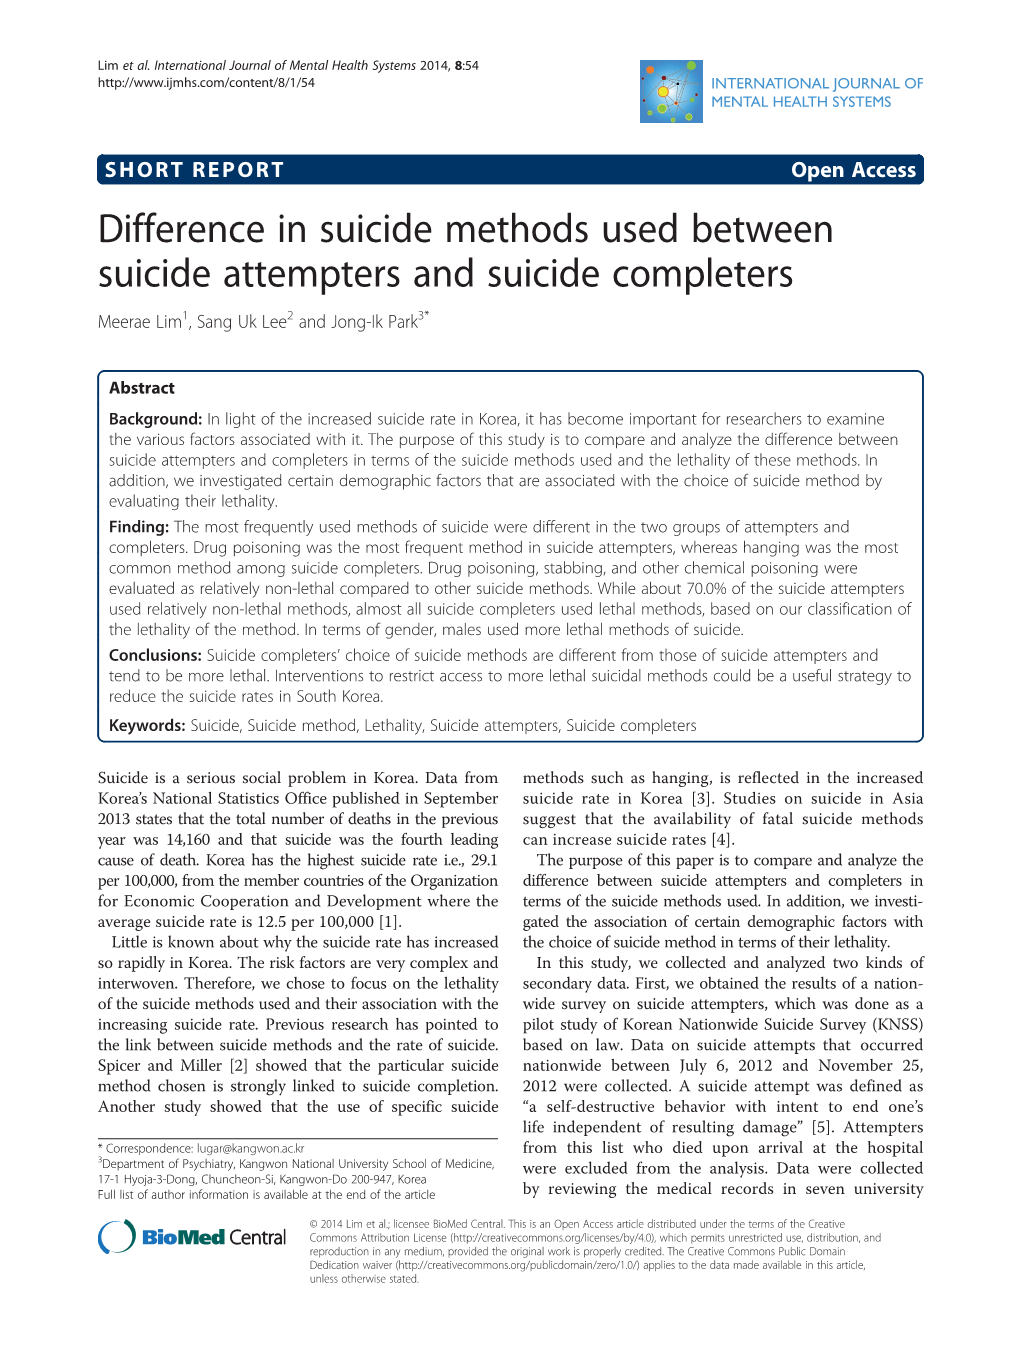 Difference in Suicide Methods Used Between Suicide Attempters and Suicide Completers Meerae Lim1, Sang Uk Lee2 and Jong-Ik Park3*